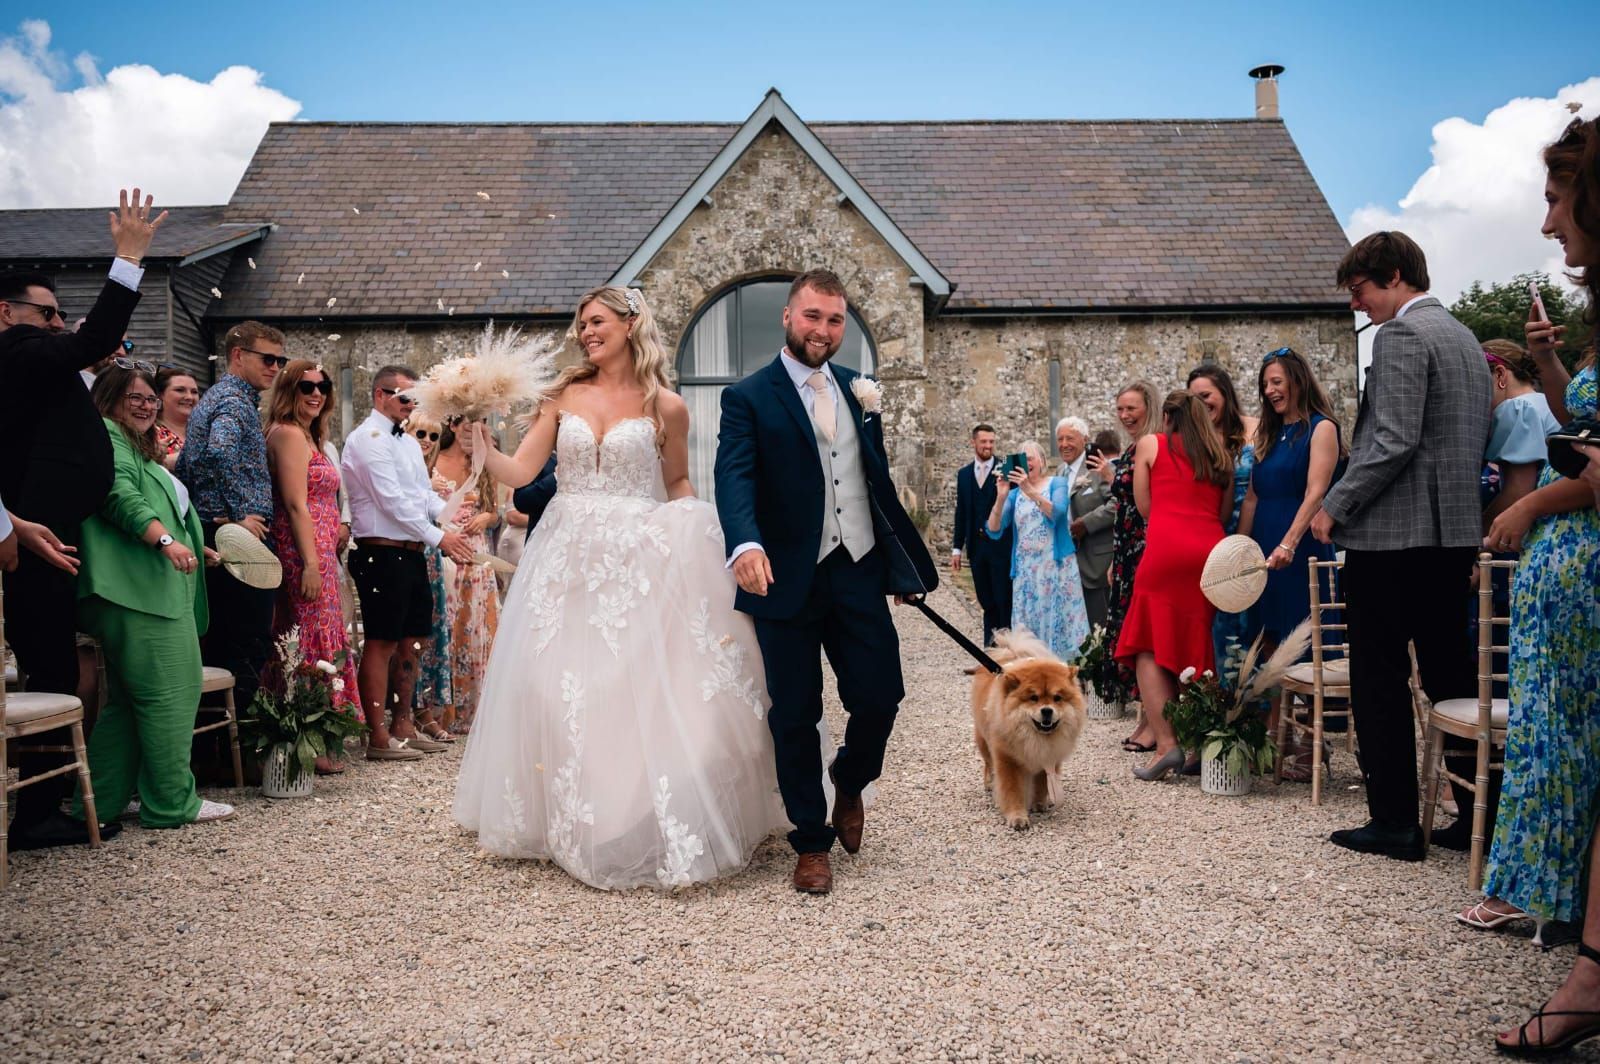 Bride and groom walking with the dog up the aisle co-ordinated by Tasha Mae Wedding Co-ordinator